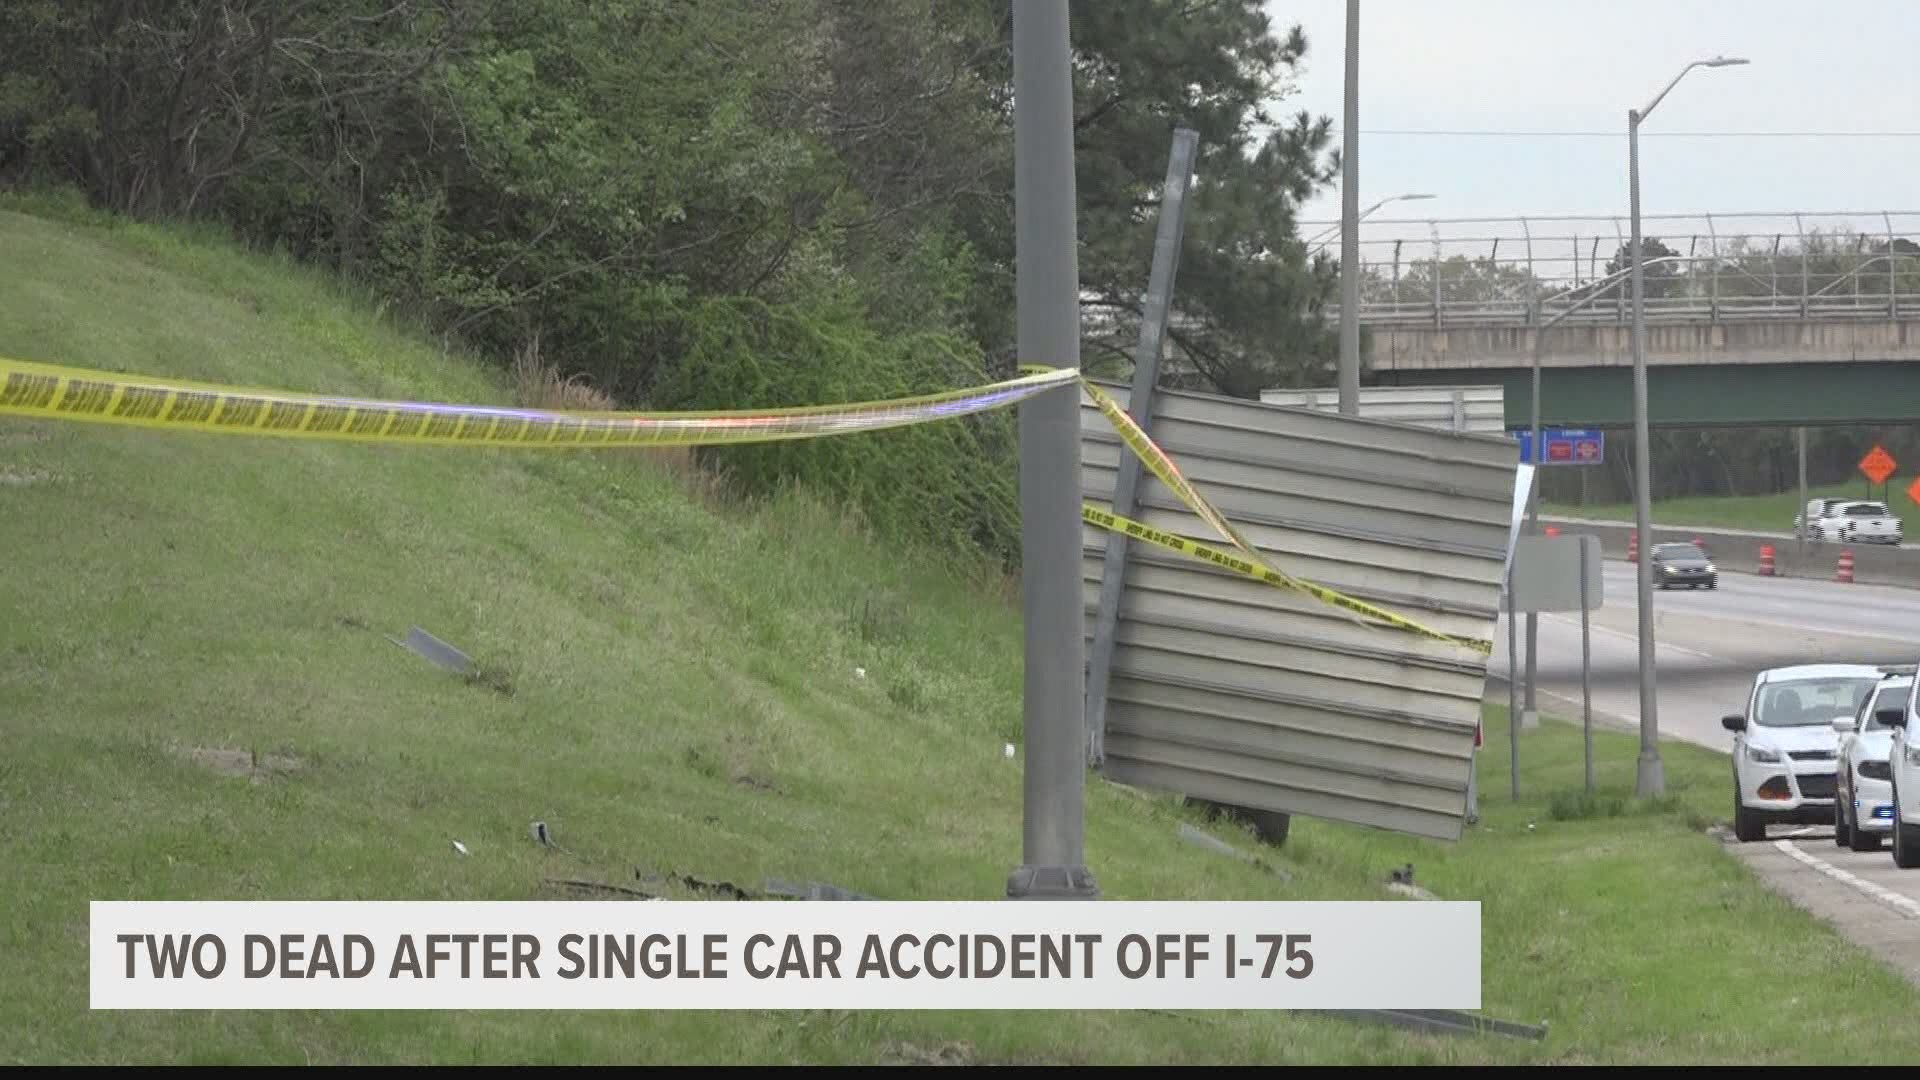 The accident happened on Saturday off the Eisenhower Parkway exit. The man died on scene, and his wife later died at the Medical Center, Navicent Health.